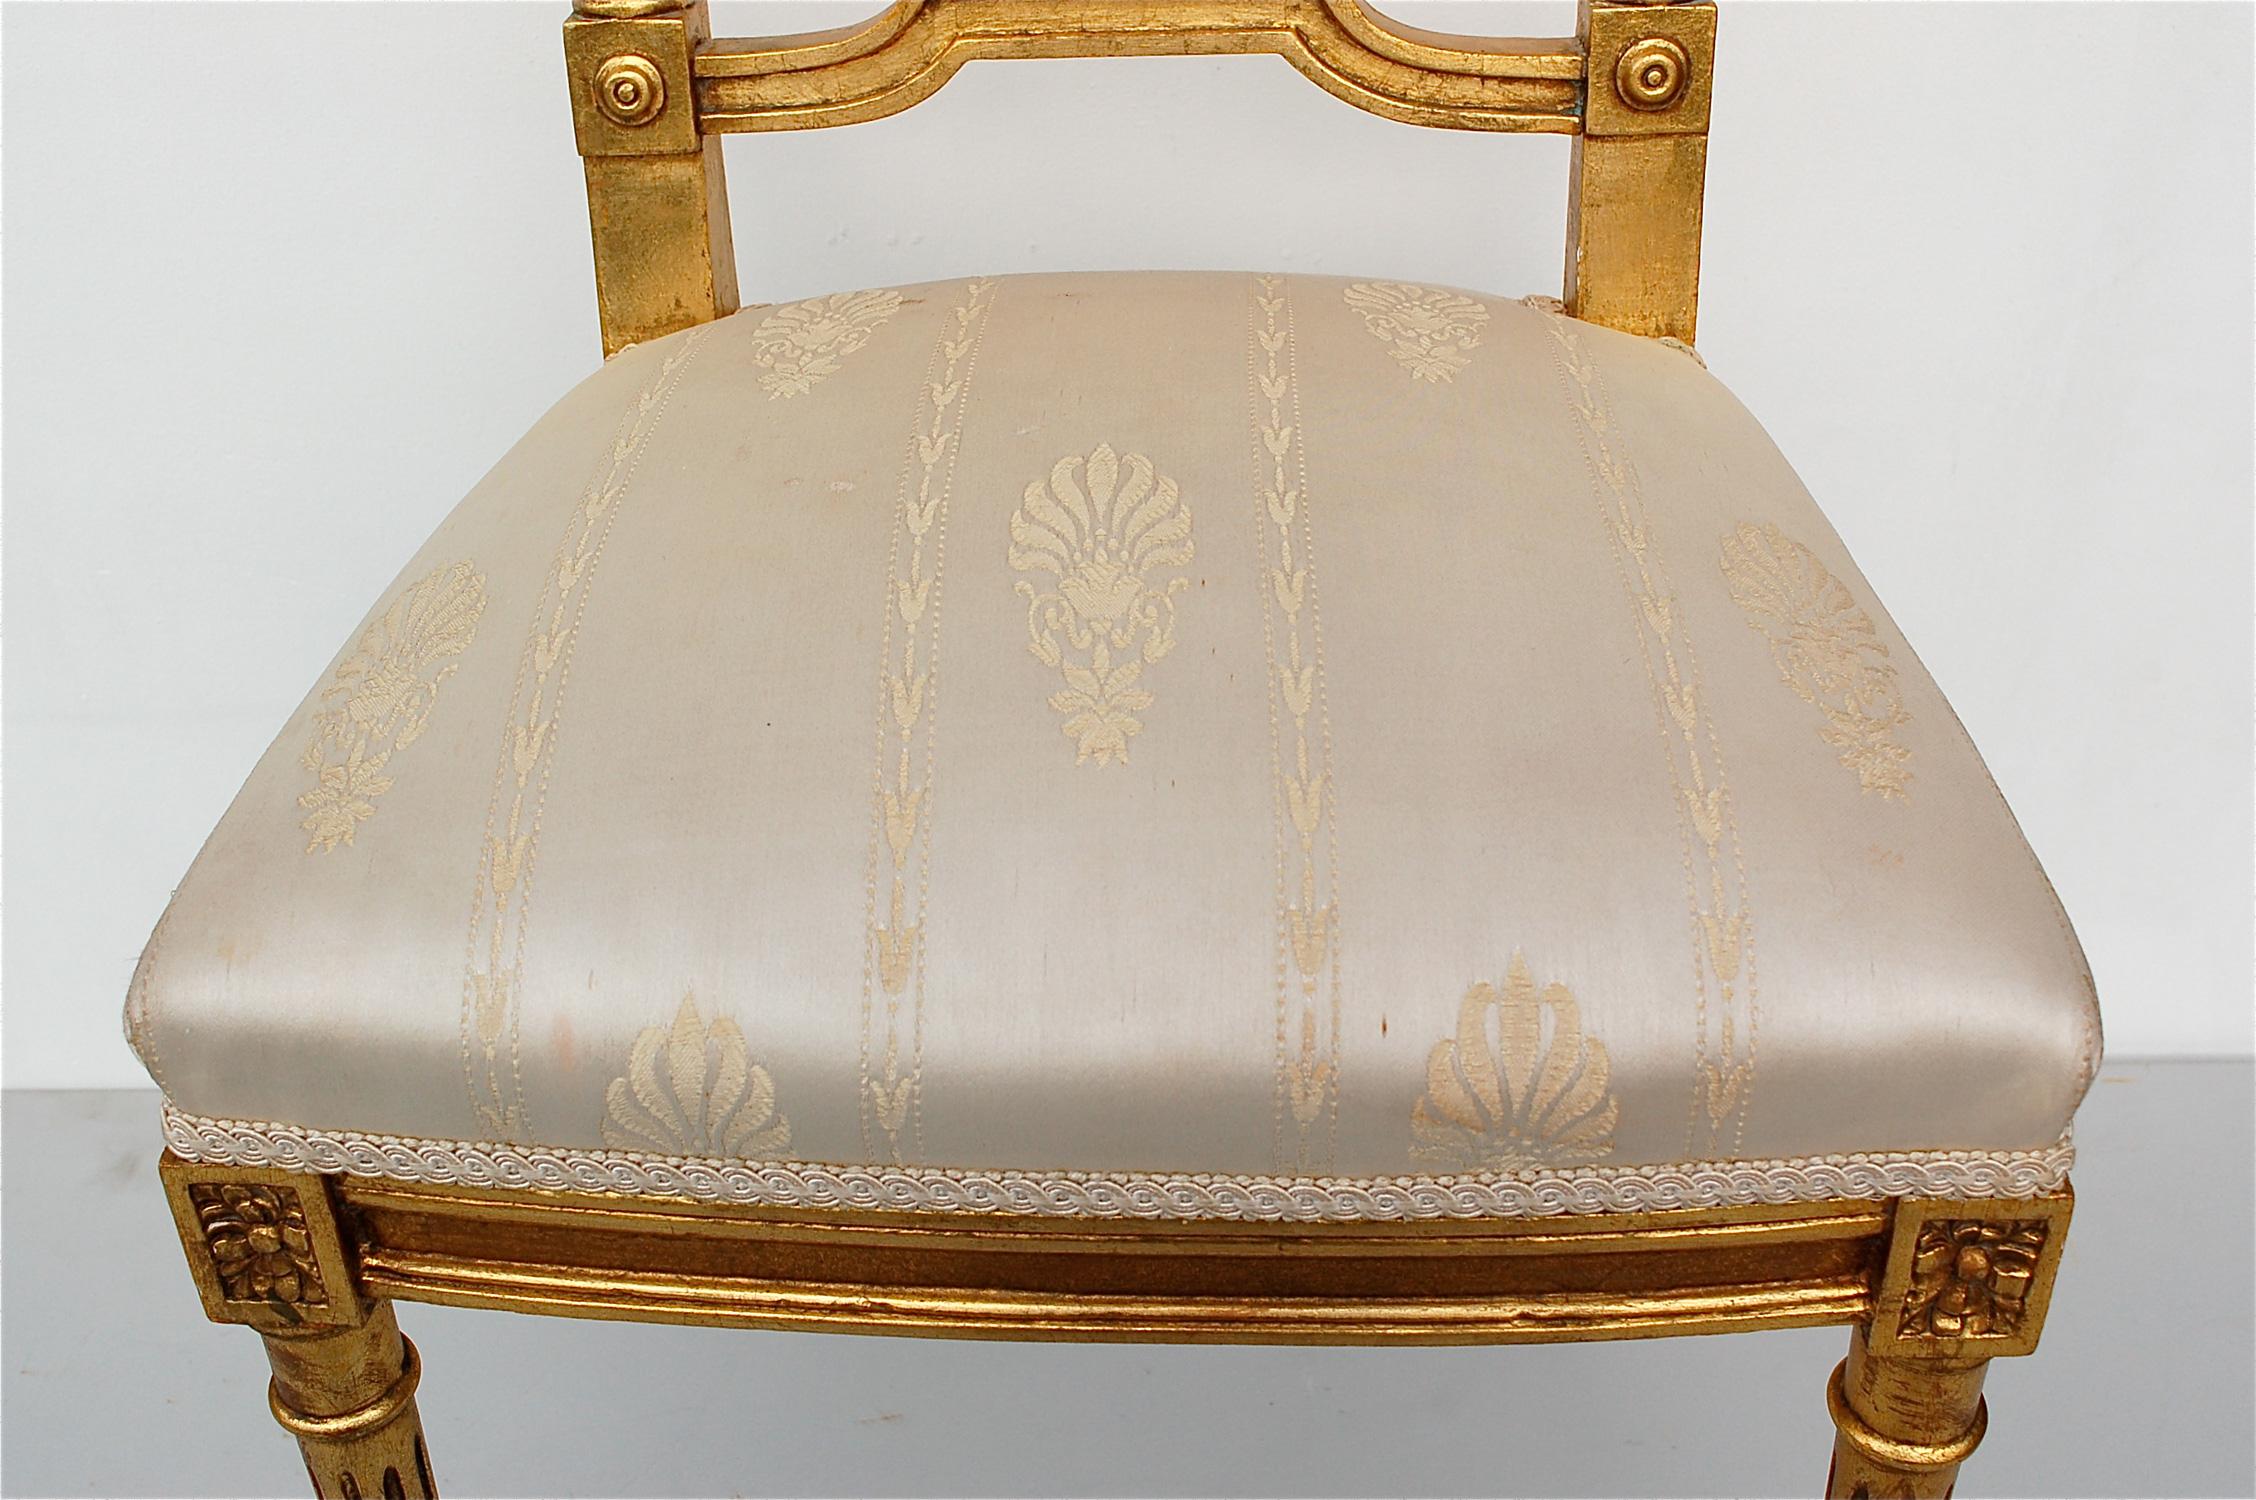 French Empire Style Giltwood Chair, Early 20th Century, France (Holz)